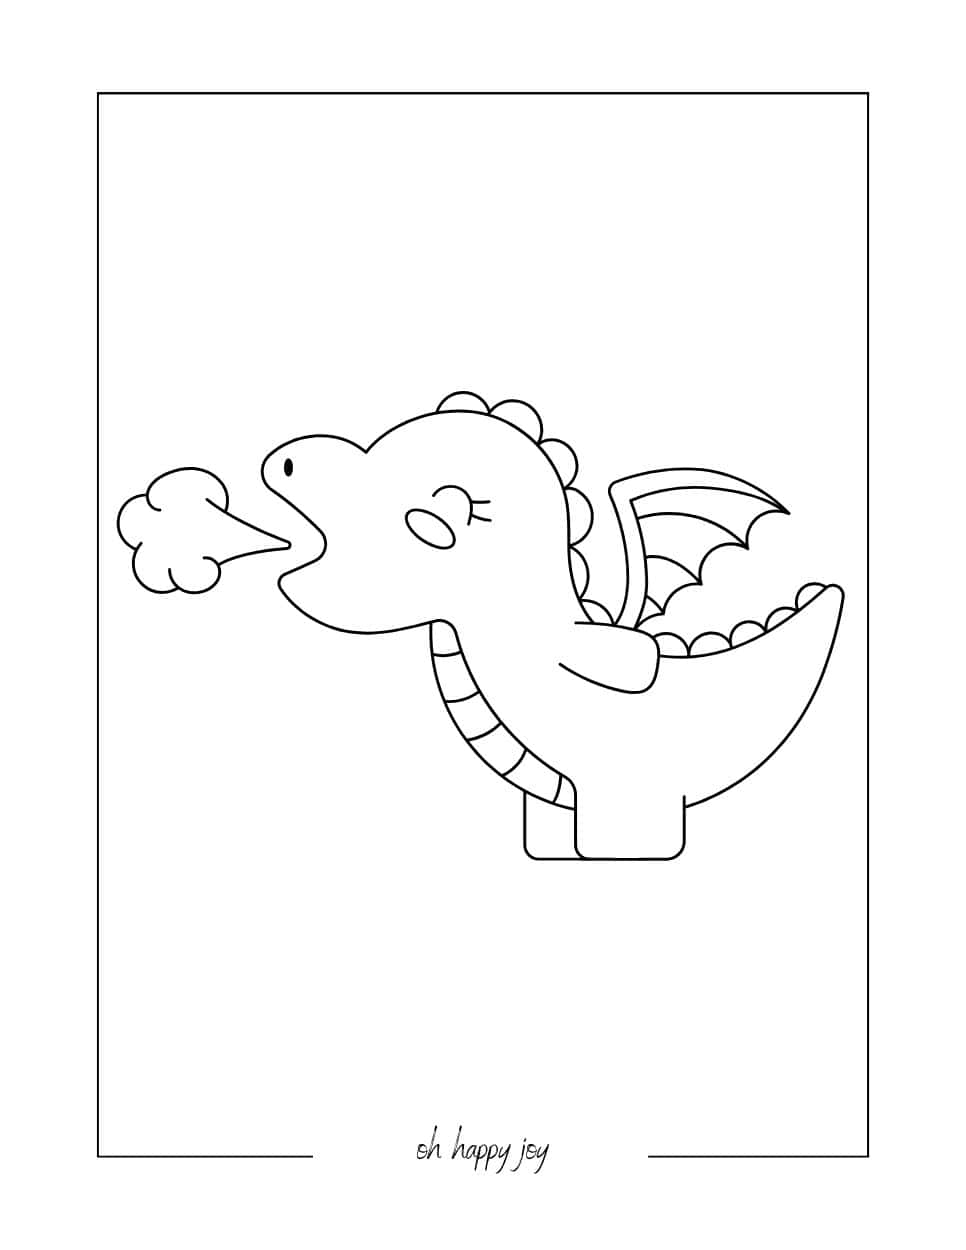 Cute Fire Dragon Coloring Page